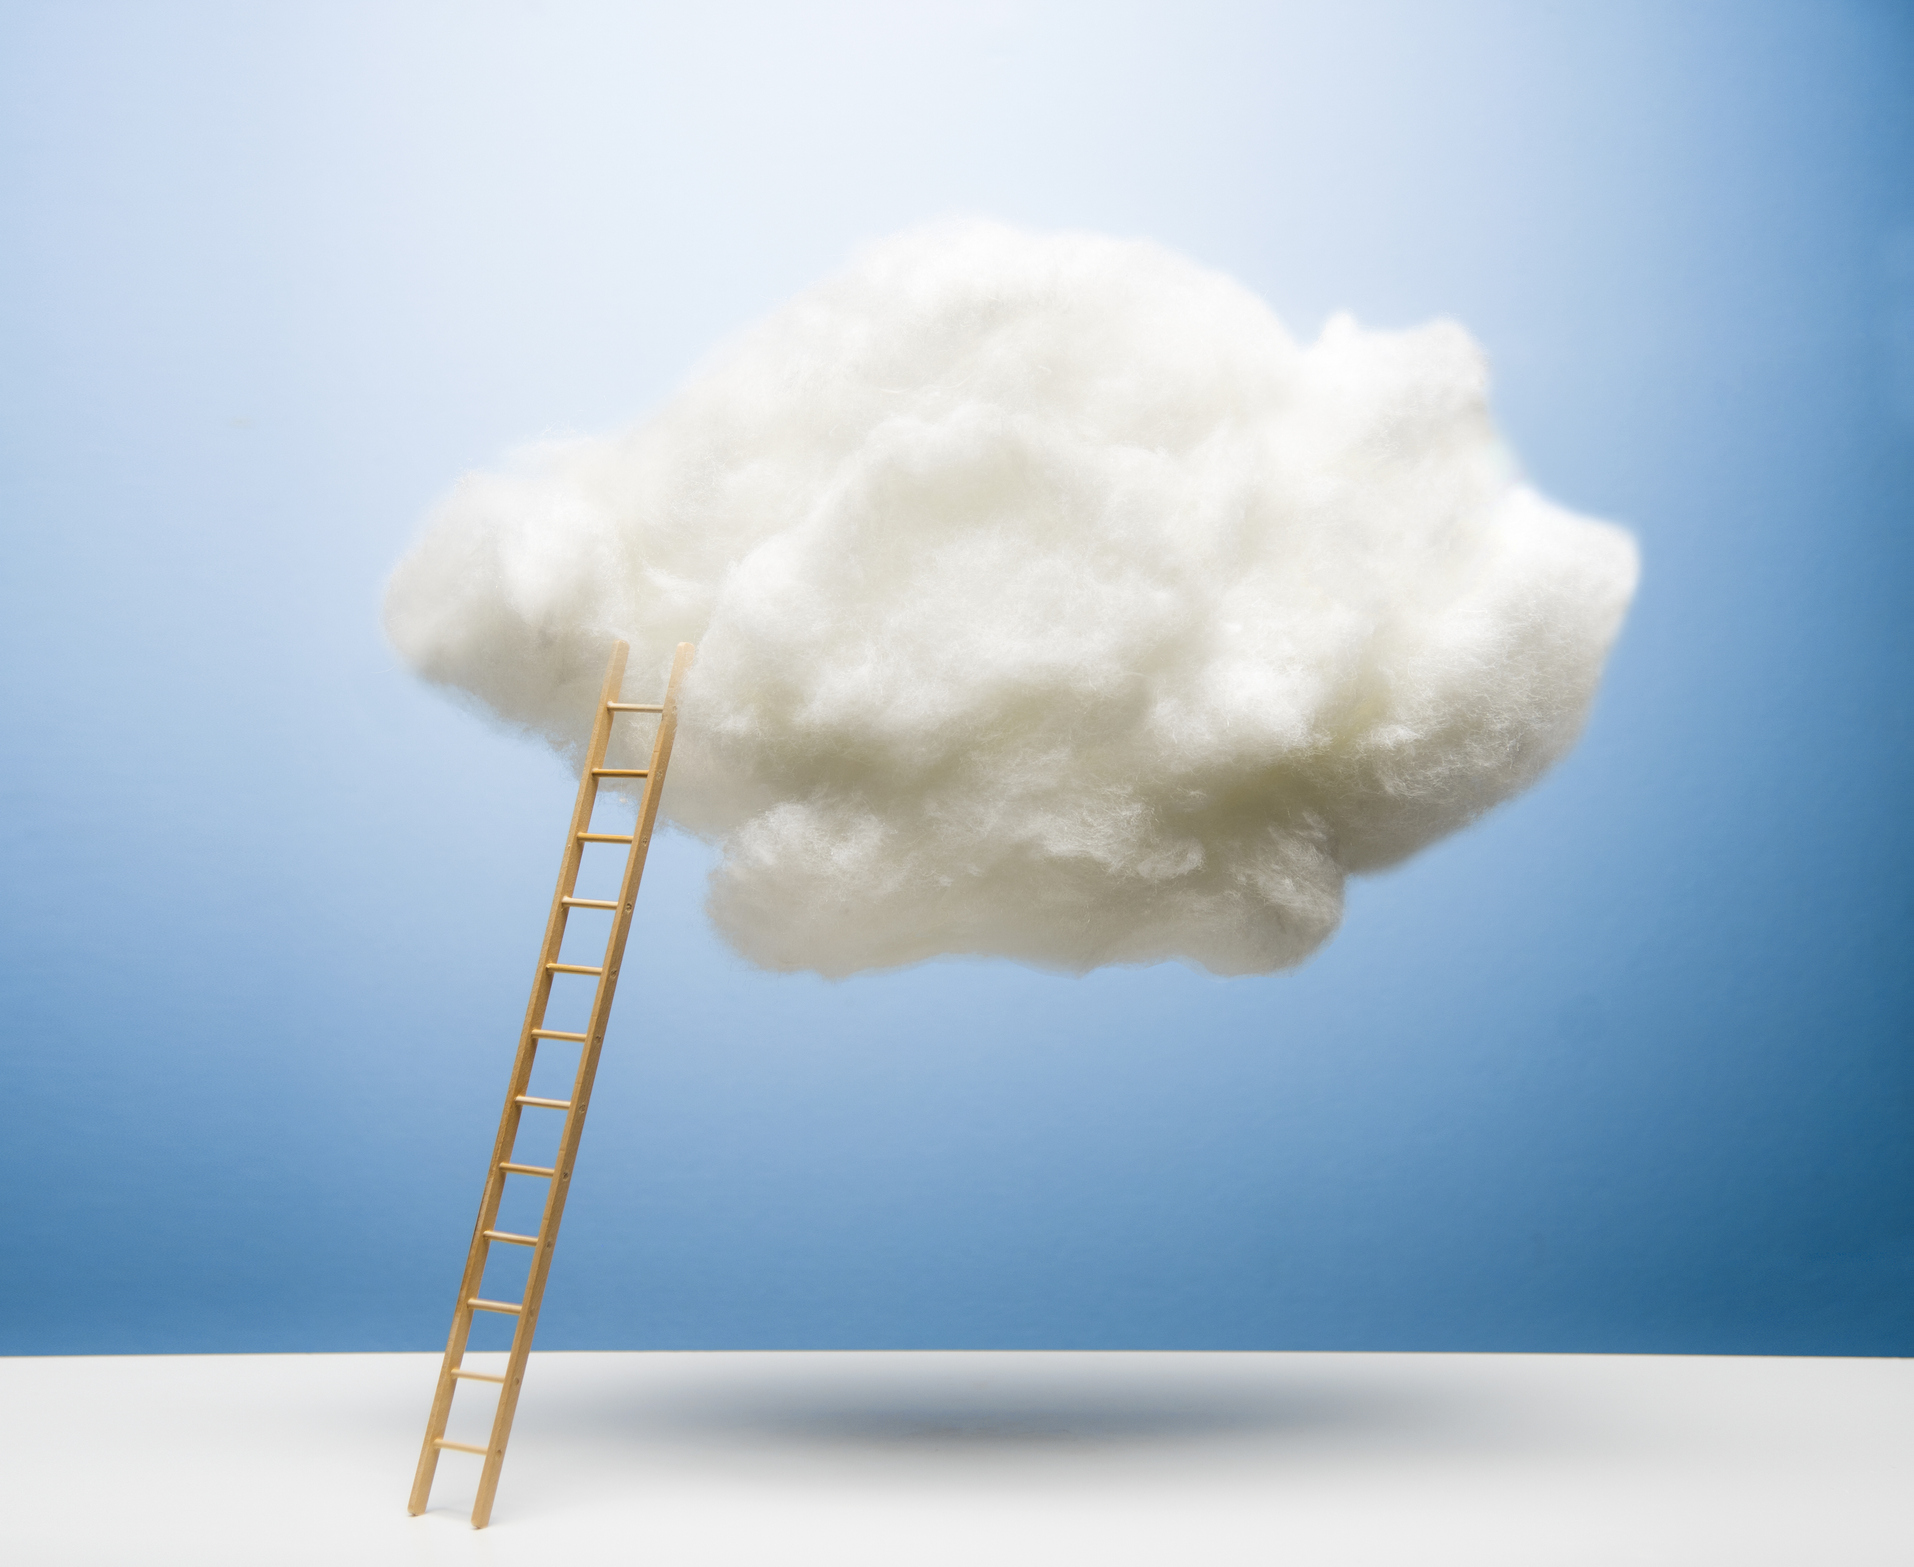 Ladder leaning on white puffy cloud on blue studio background, white surface, drop shadow